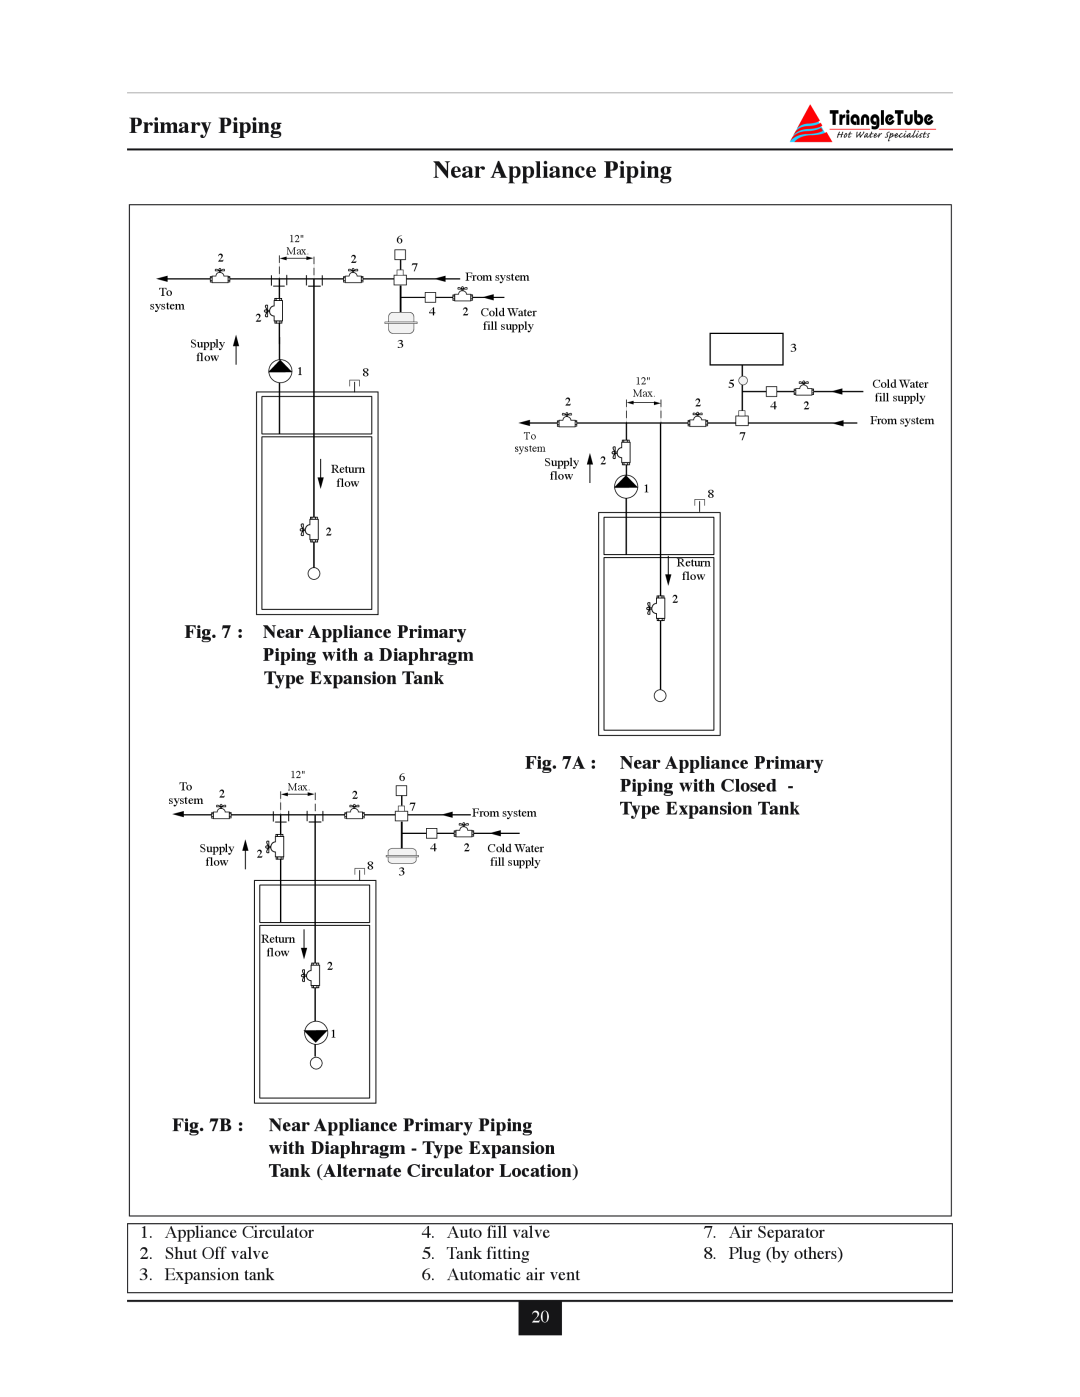 Delta F-25, 35 Near Appliance Piping, Primary Piping, Near Appliance Primary, Piping with a Diaphragm Type Expansion Tank 